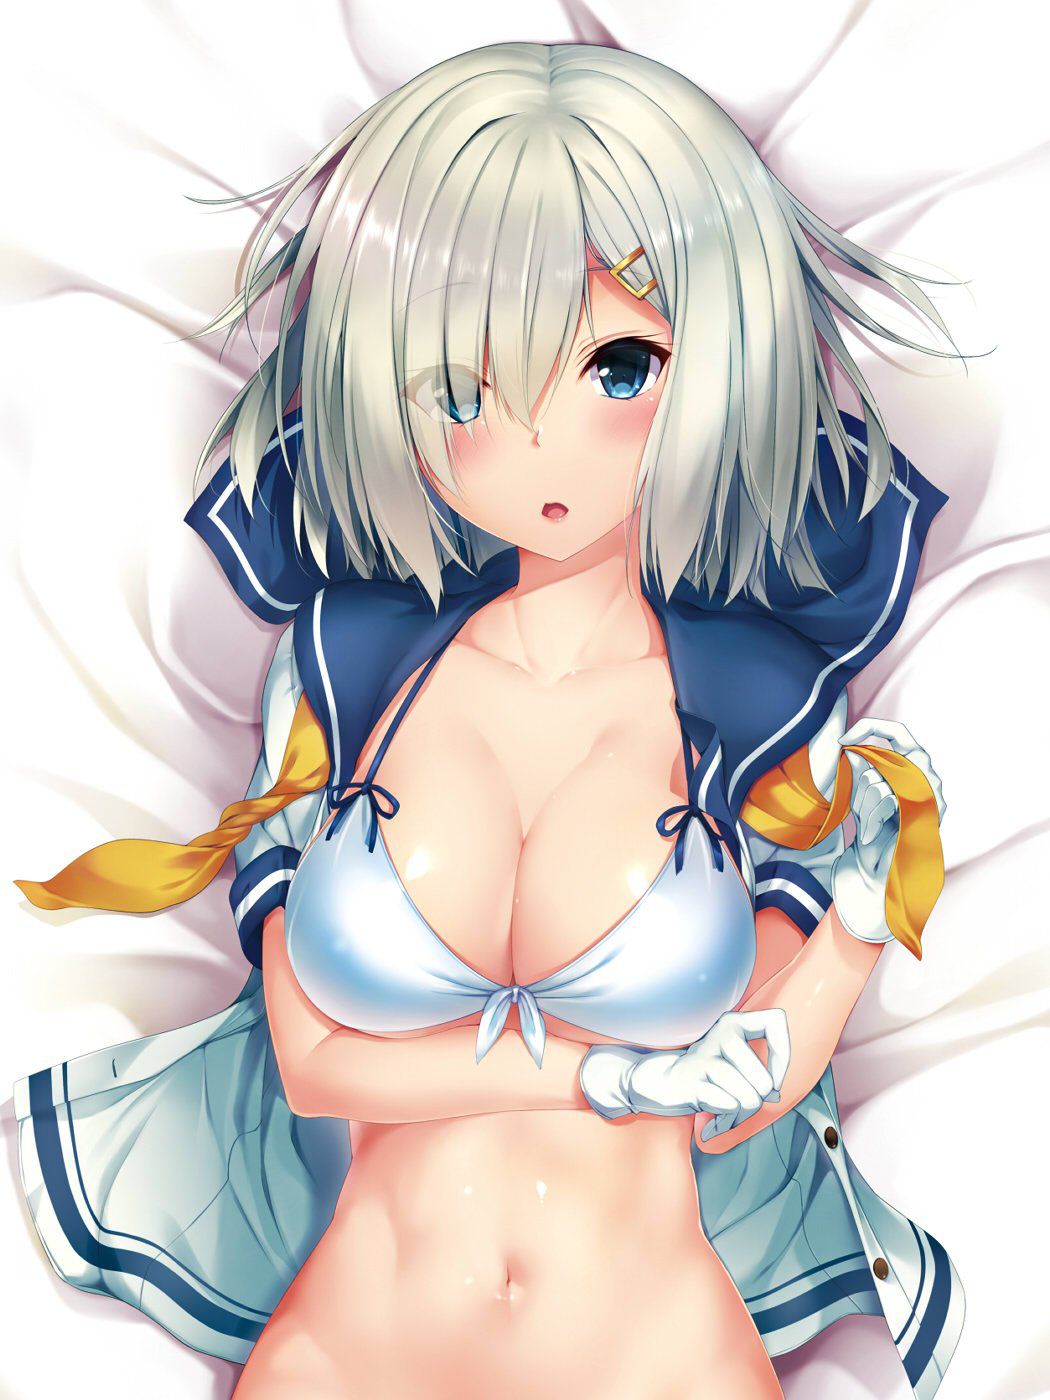 [Ship it] hamakaze erotic pictures so this overwhelming cuteness! 4